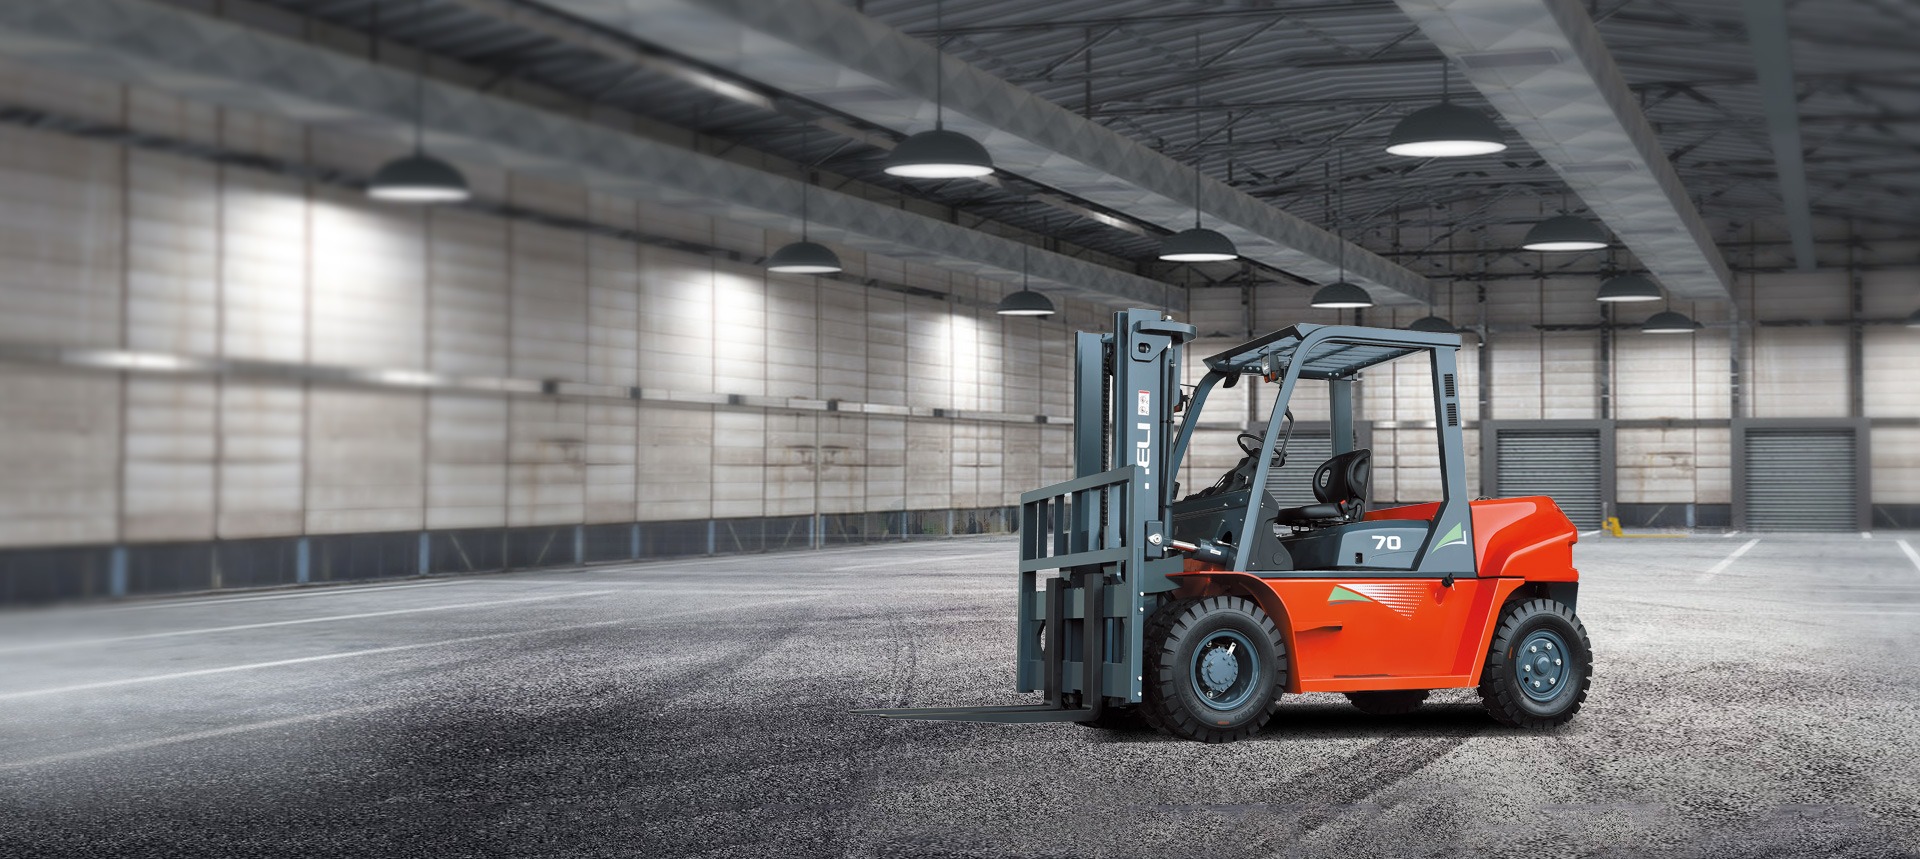 Forklift Wallpapers